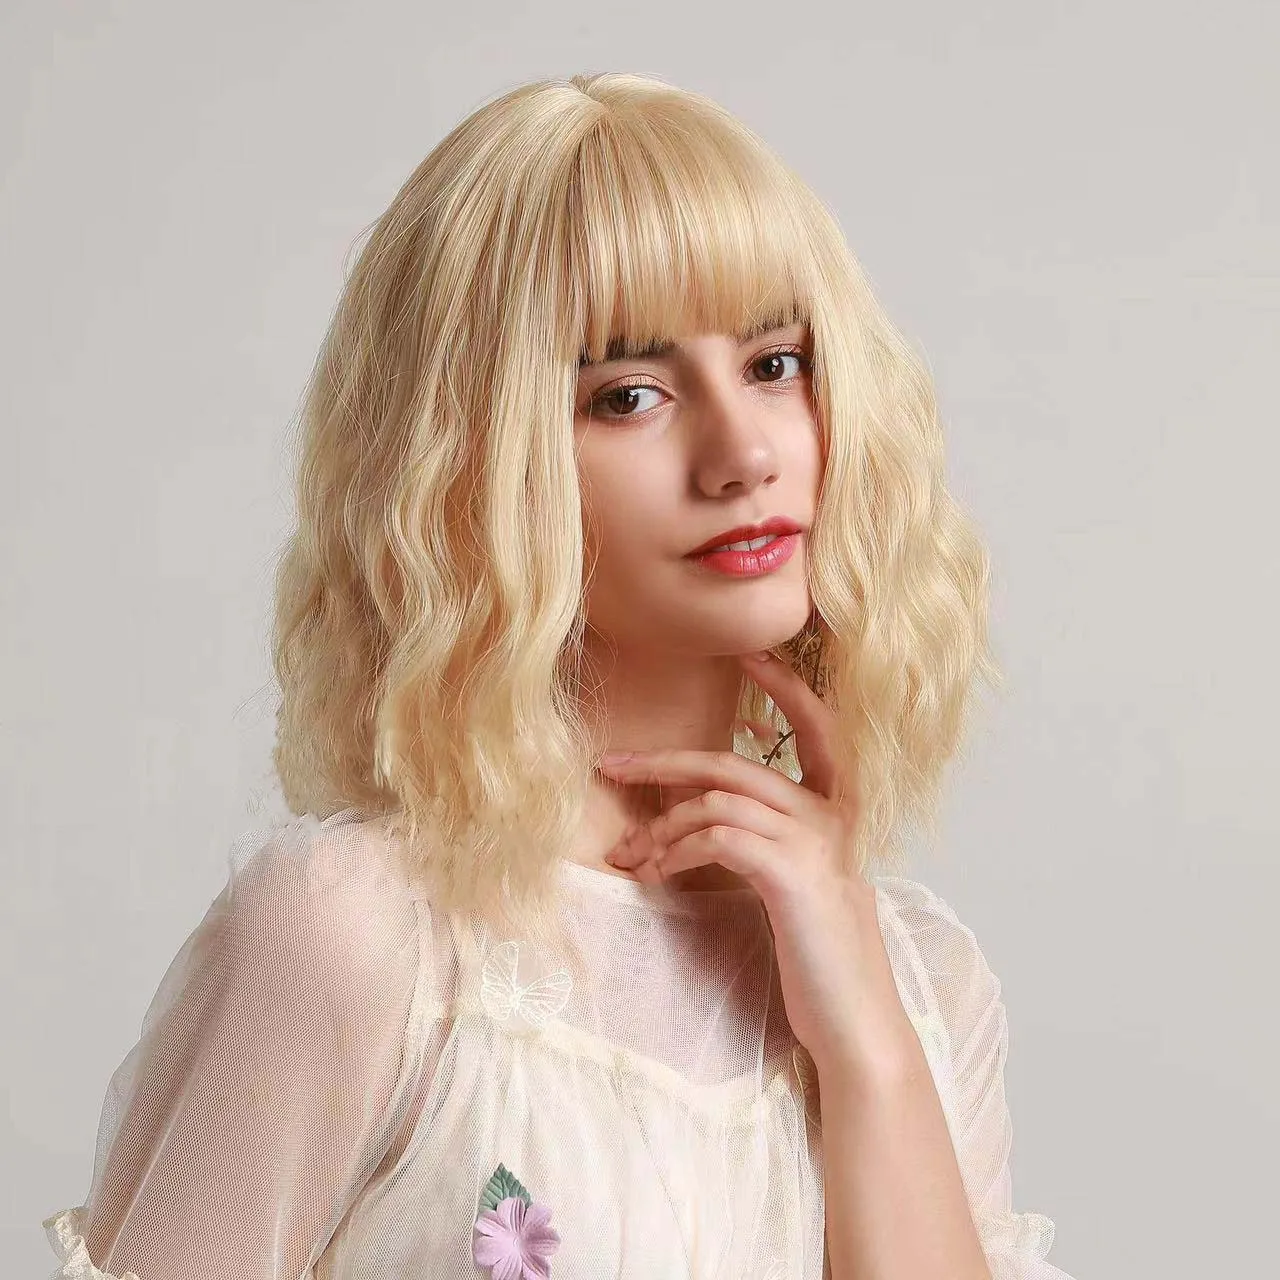 Women's Blonde Wigs Short Hairstyle 14 Inches Bob Natural Synthetic Bangs Wavy Wigs Fluffy Black Hair Wig Glue-free Cosplay Hair 12pcs lot 0 7 10cm keratin glue sticks fusion glue brown blonde black and transparent blonde 3 colors in stock optional